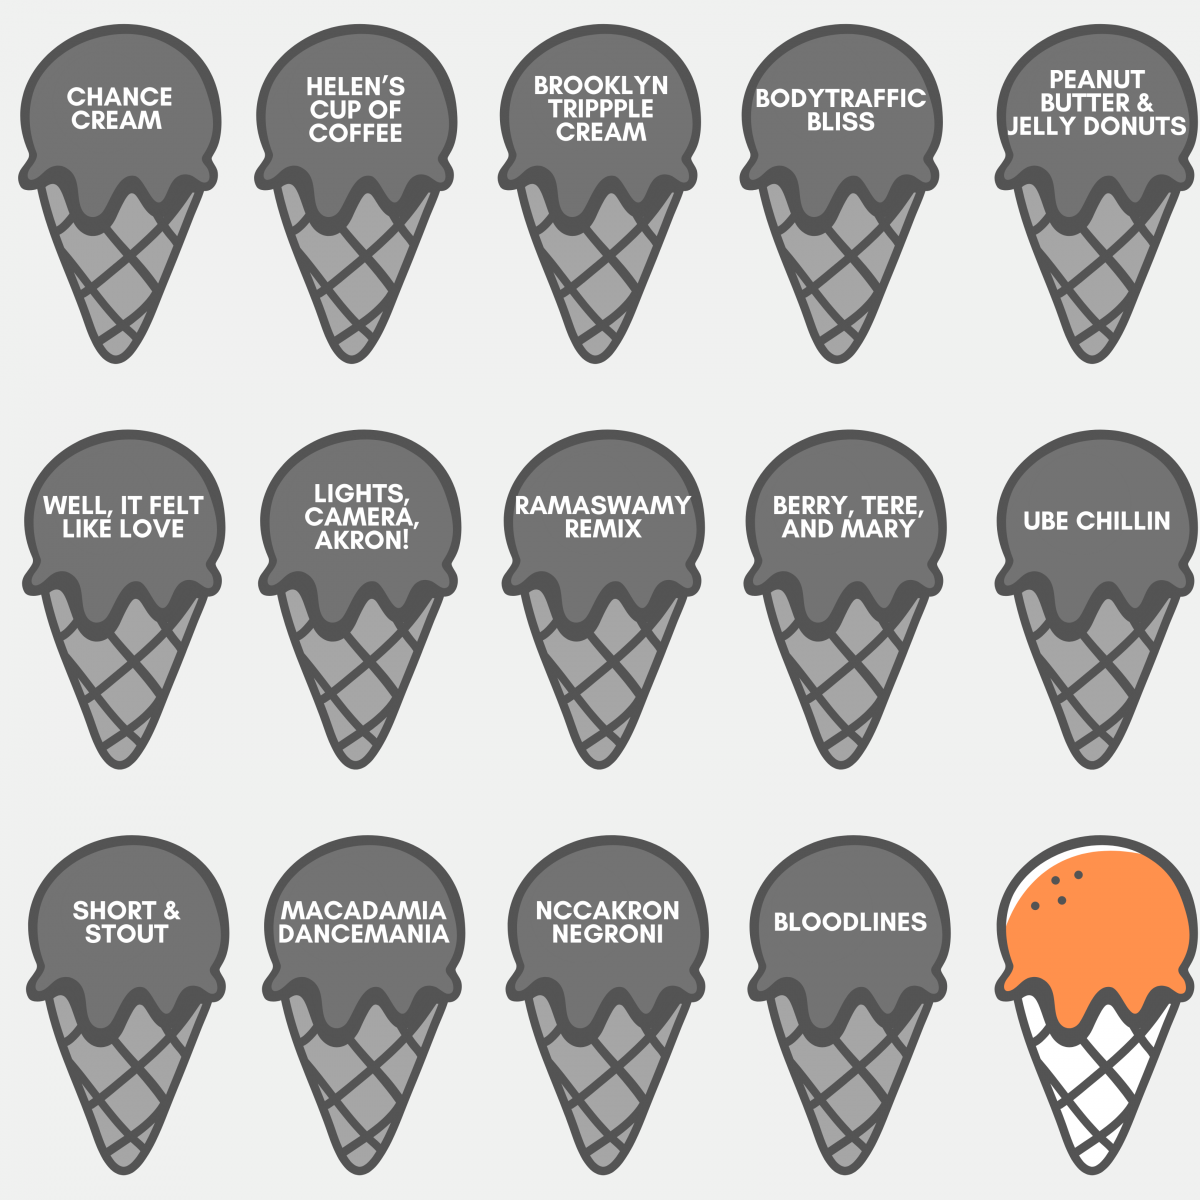 The fourteen flavors of NCCAkron, with more to come. Image description: A 3×5 grid of gray-and-black ice cream cones with names like “Lights, Camera, Akron!” and “Macadamia Dancemania”. The last cone is orange, and unnamed, implying a delicious future of flavors ahead.